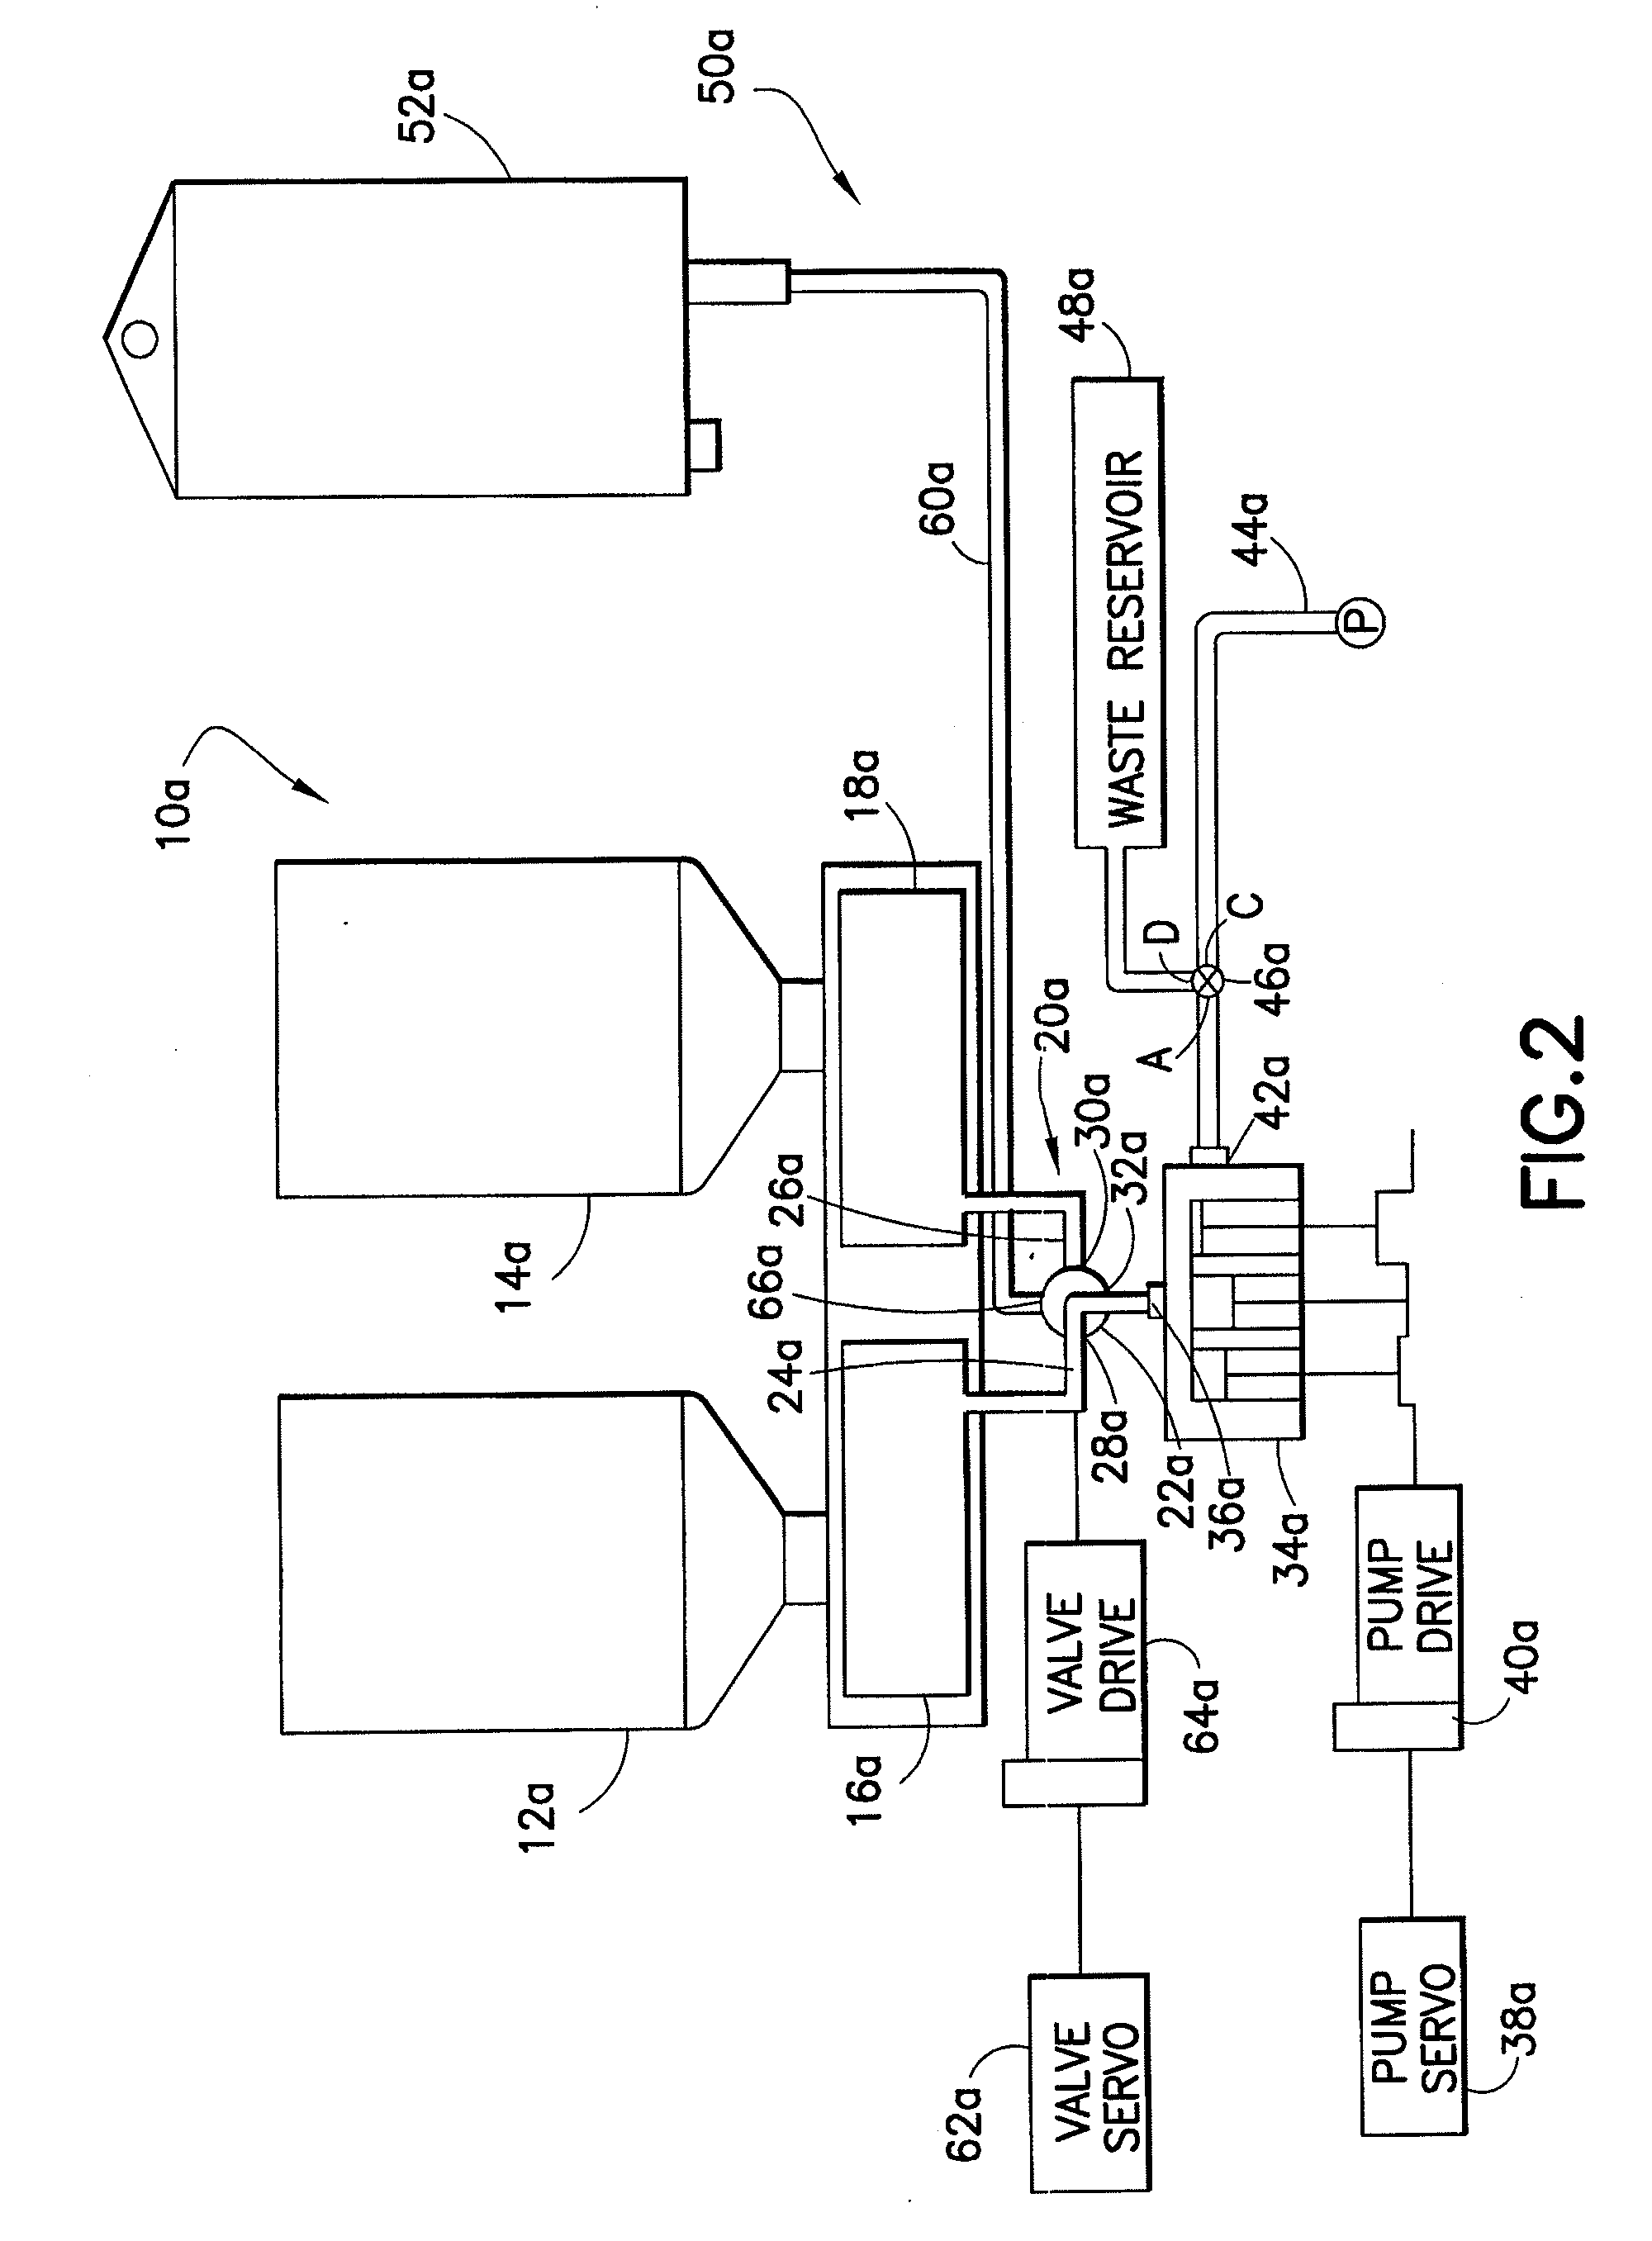 System and method for proportional mixing and continuous delivery of fluids